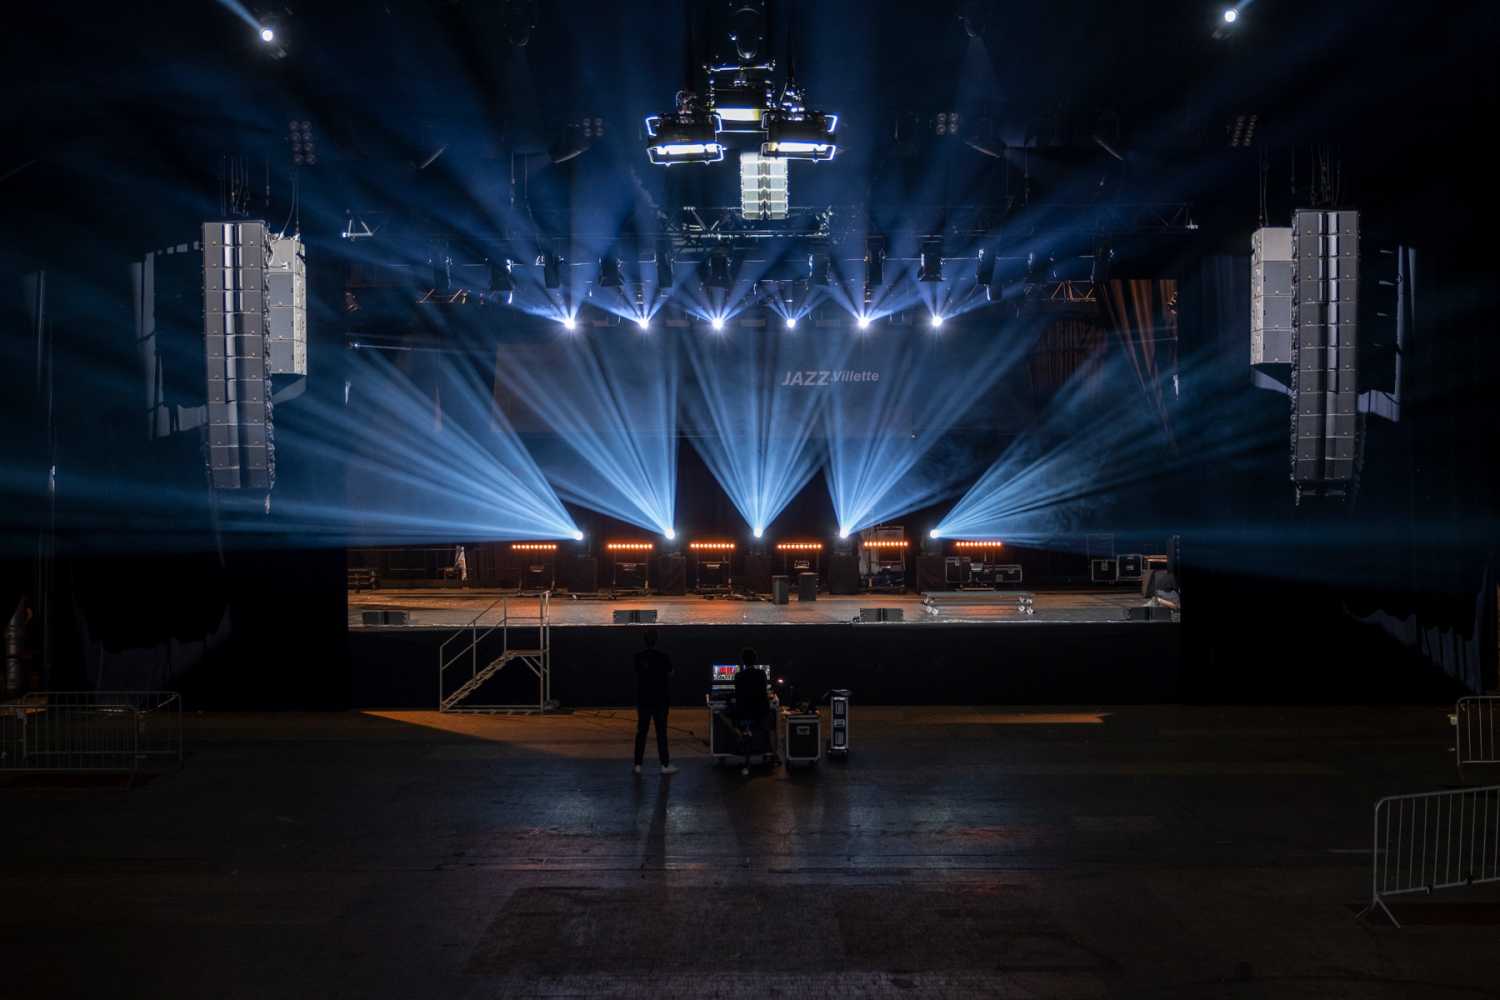 The Grand Halle’s 18,000m2 space is modulable, to accommodate a wide variety of events